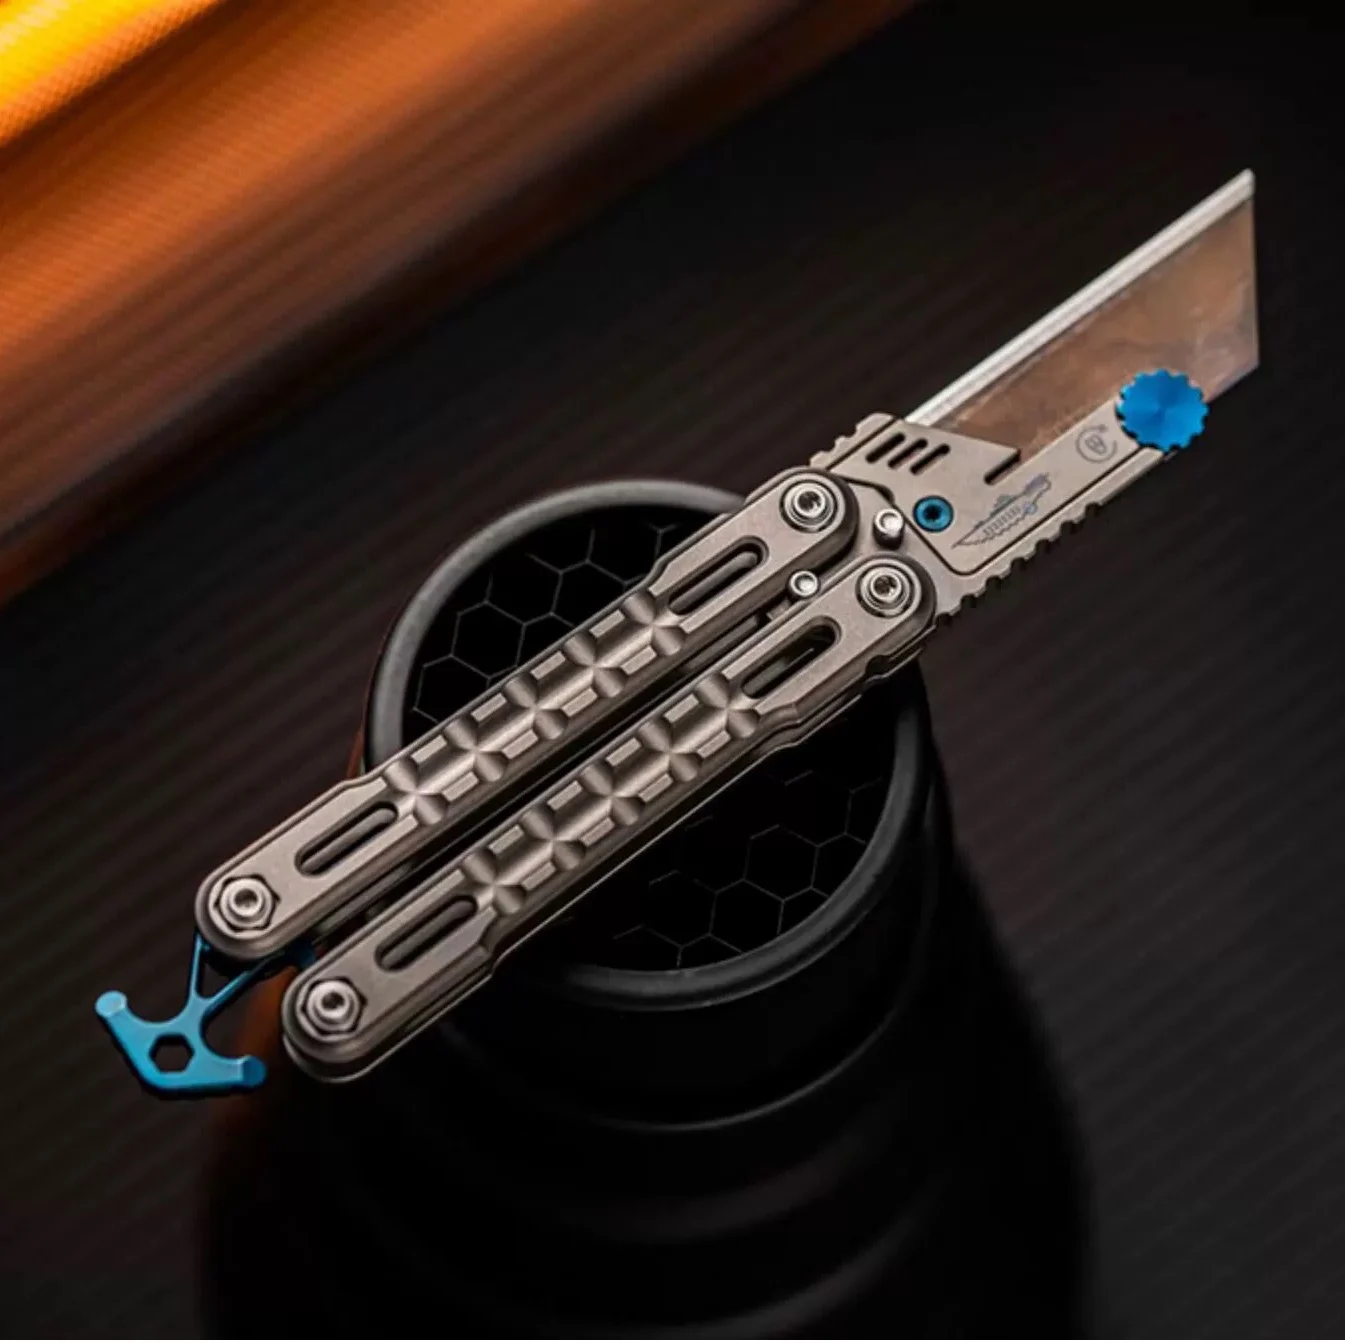 

Moyeworks BALY CUTTER 3.0 True Color Multifunctional Outdoor Quick Release Structure Titanium Alloy EDC Paper Folding Knife